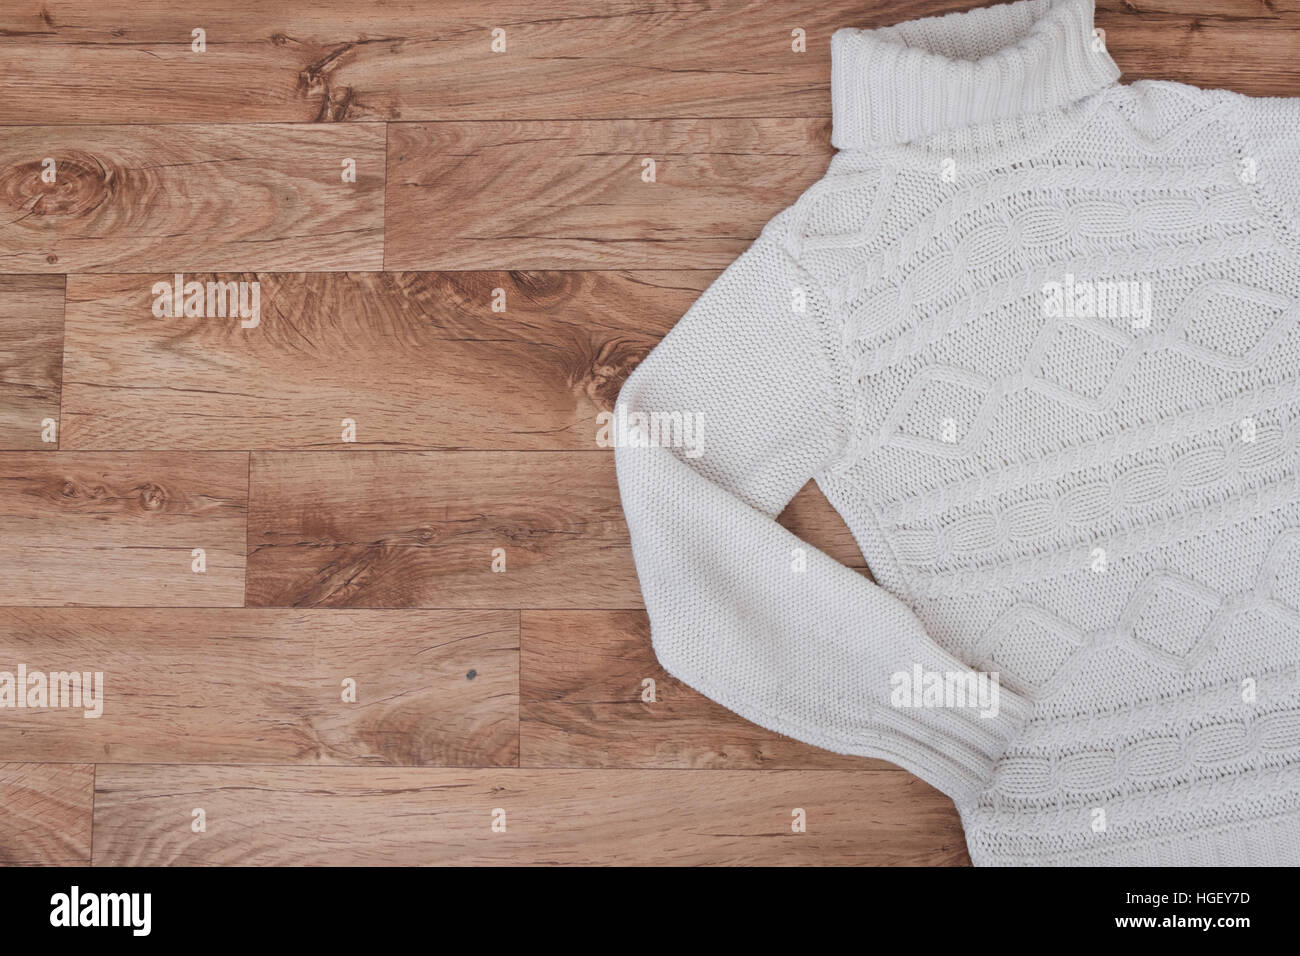 Winter clothing top view on wooden Stock Photo